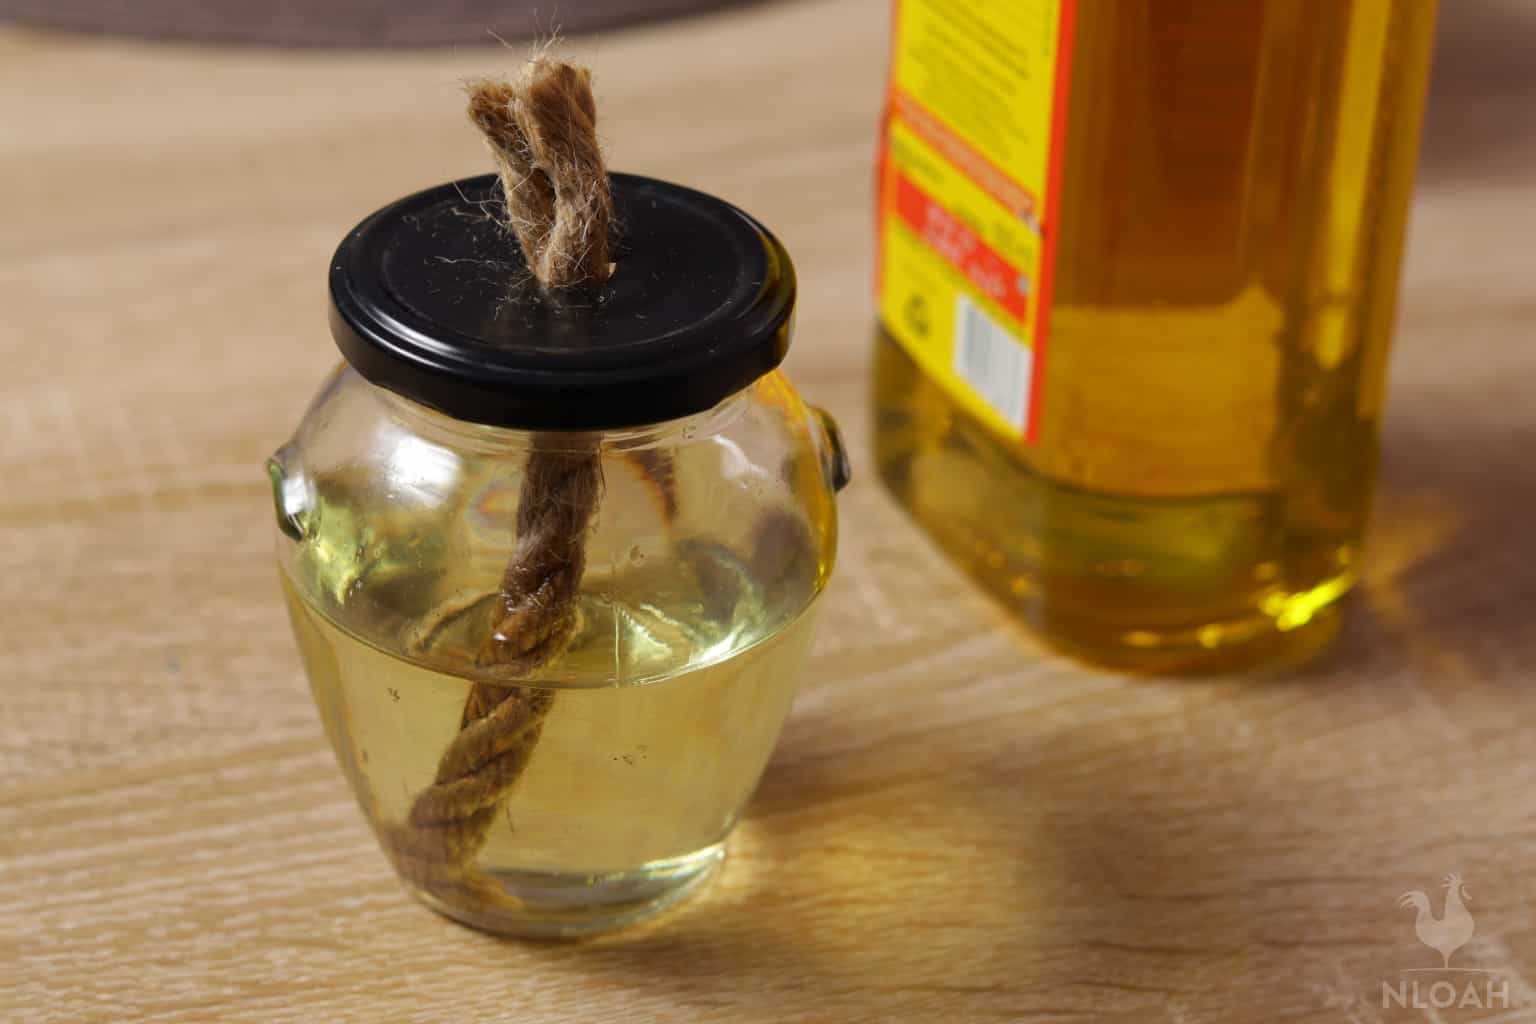 cooking oil used as part of a DIY lamp